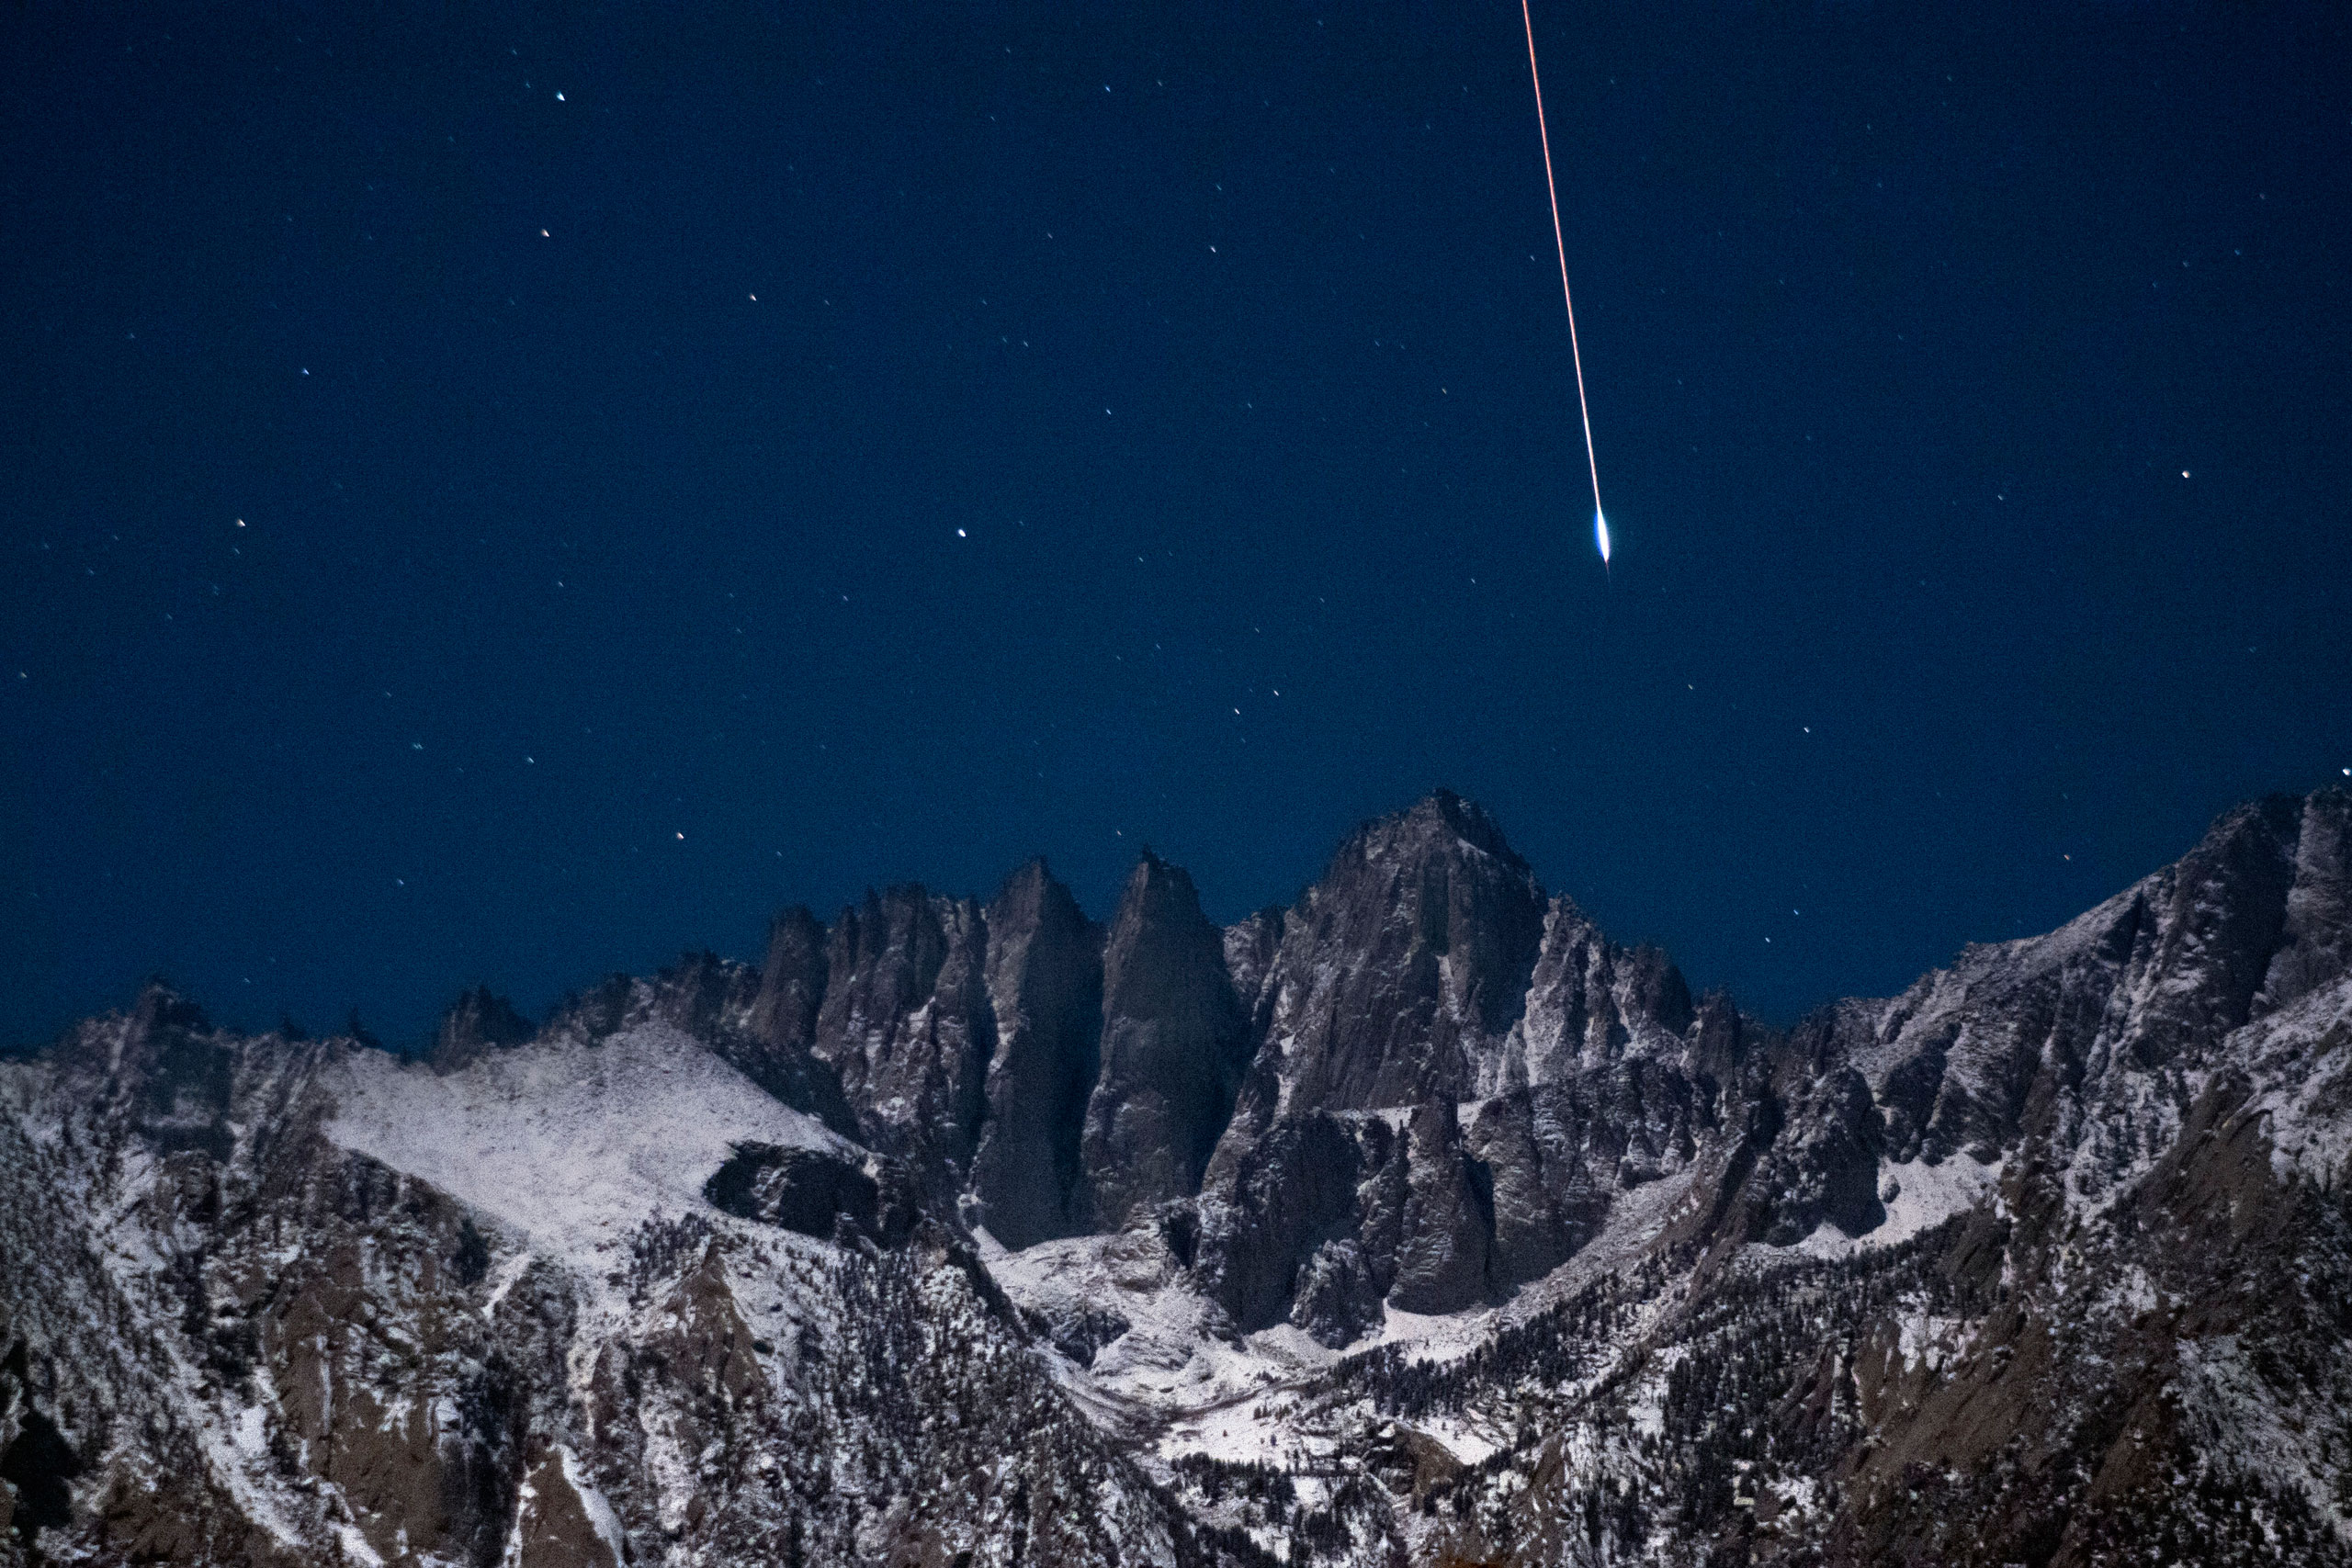 A bright Geminid meteor falls from the sky over the summit of 14,505 foot Mount Whitney in California's Sierra Nevada mountains on Dec. 14, 2011.